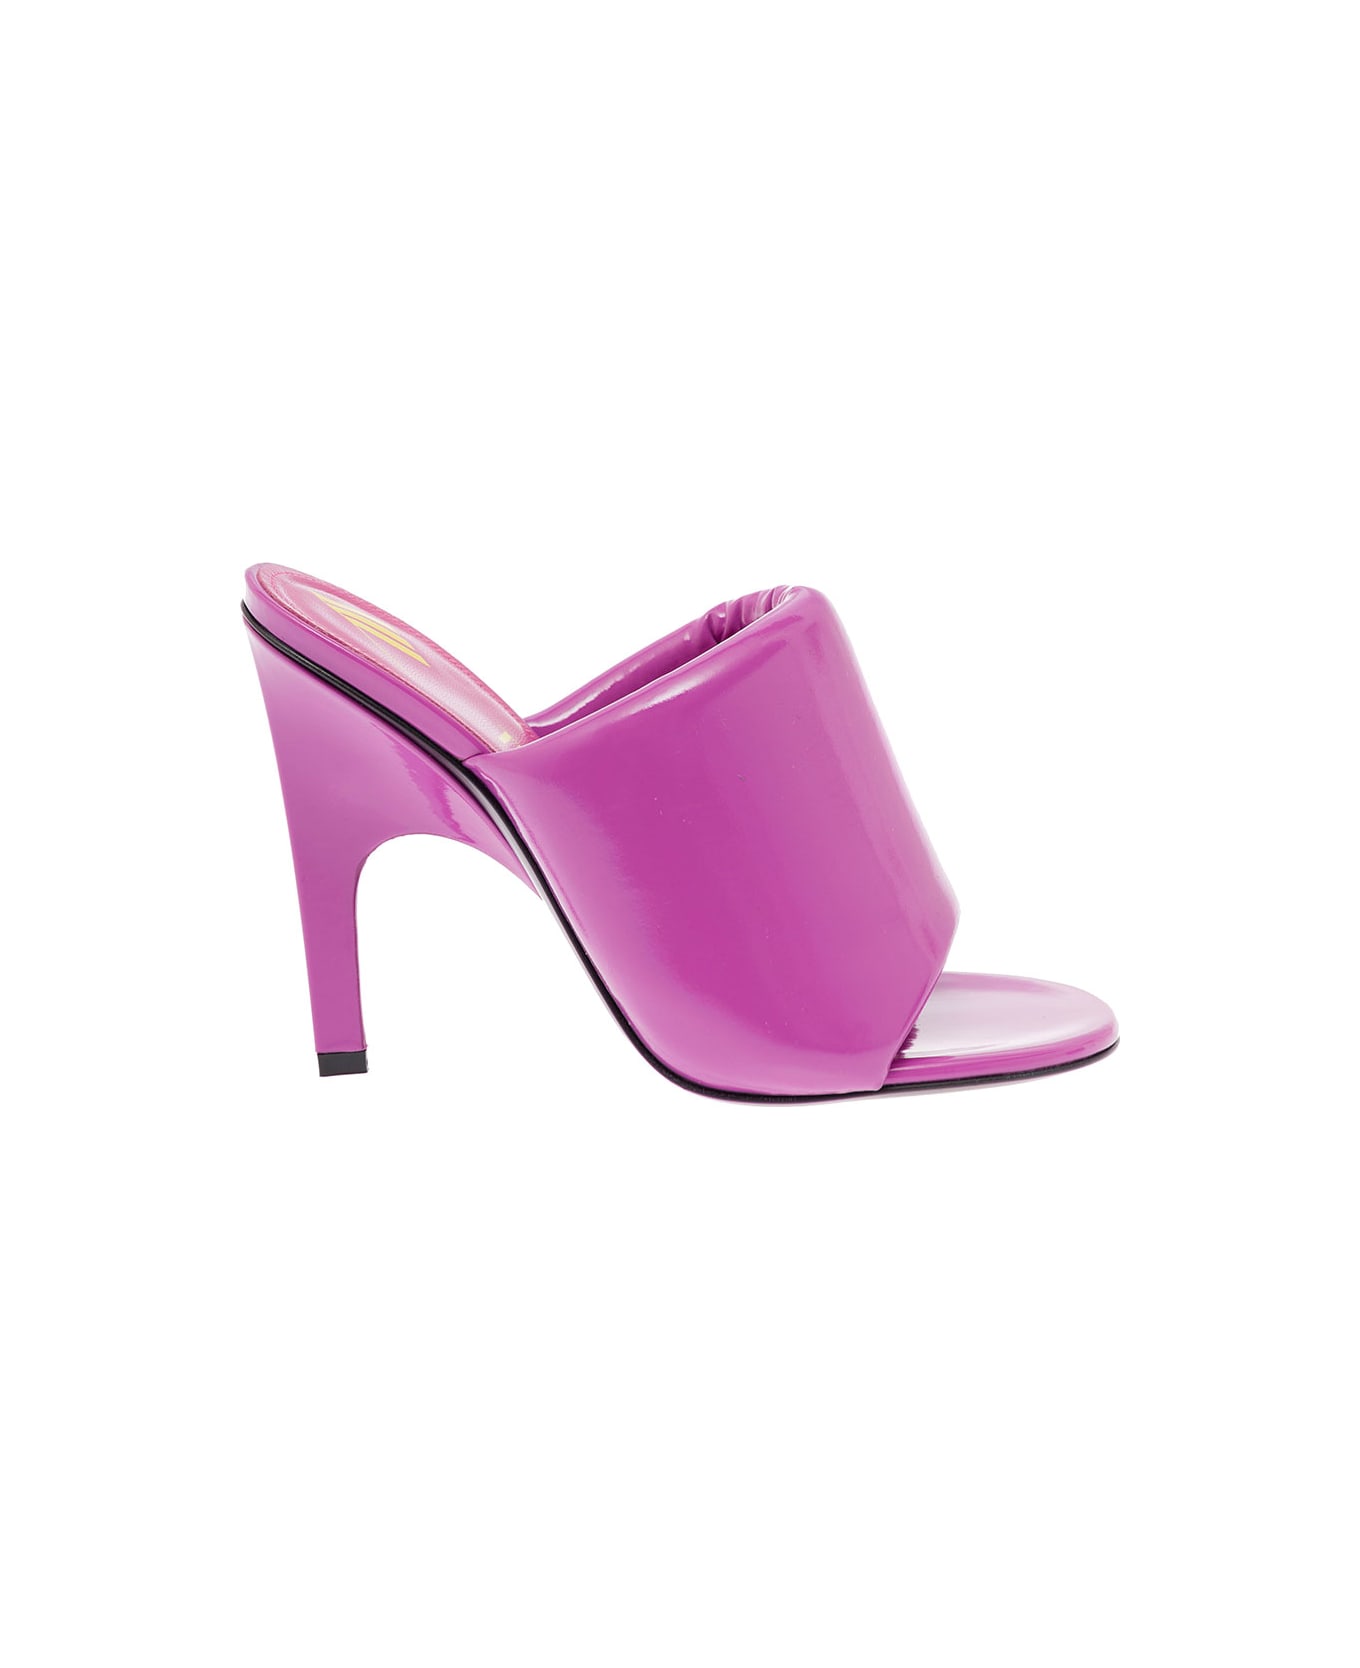 The Attico Woman's Pink Leather Rem Mules - Pink